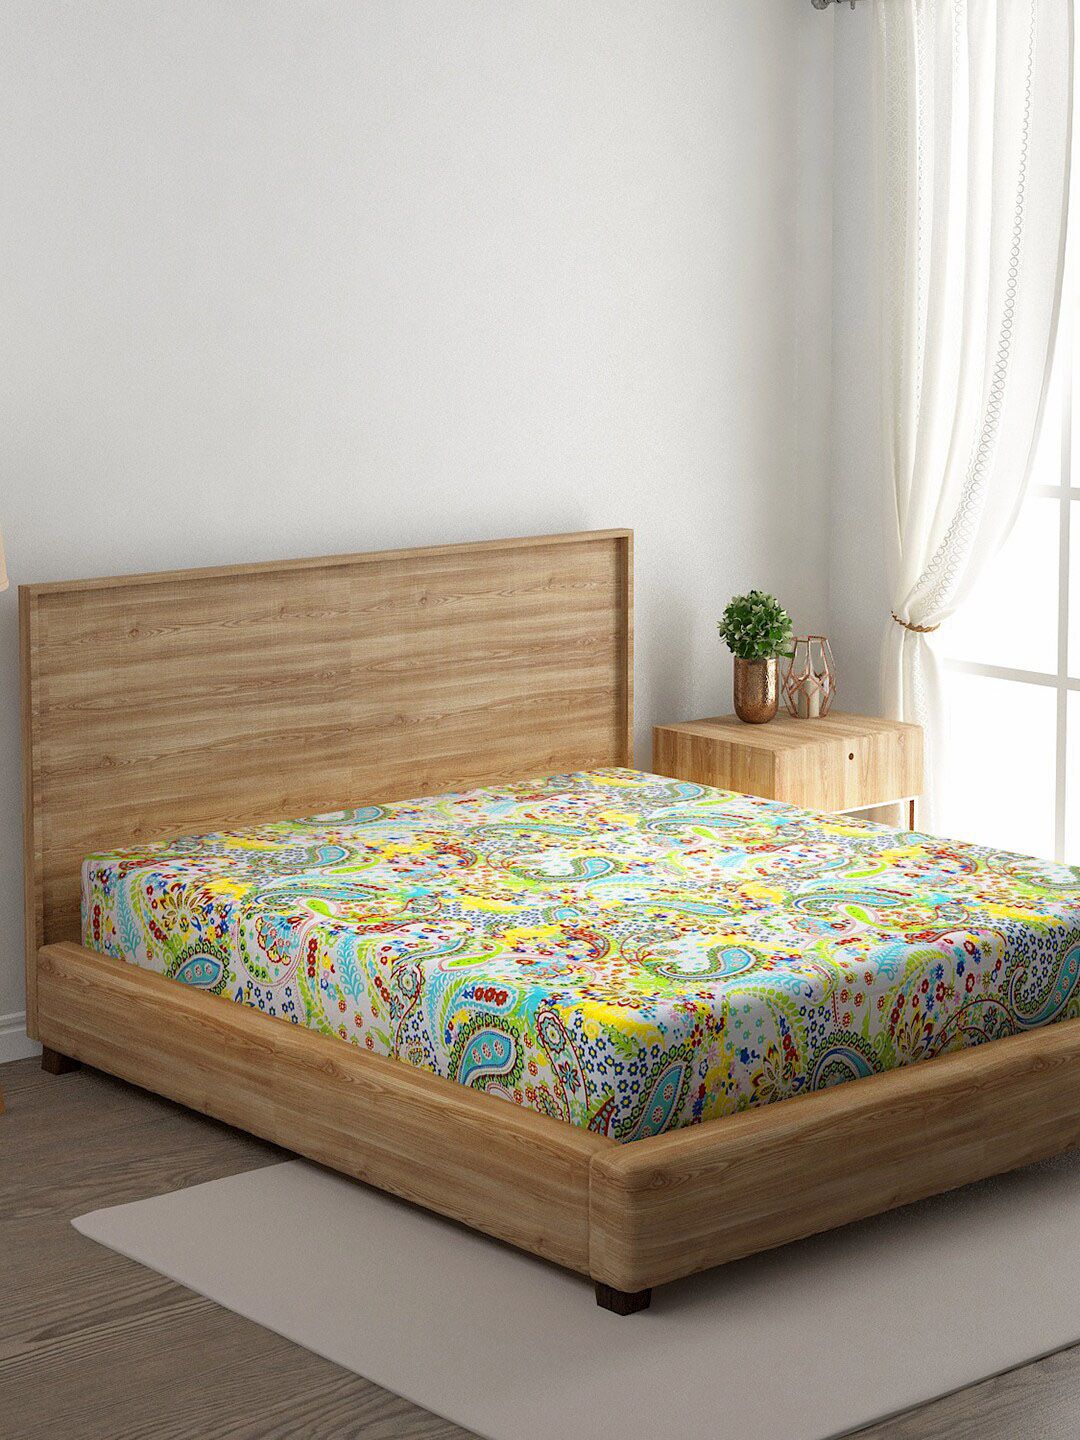 Rajasthan Decor Multicoloured Waterproof Quilted Cotton King Bed Mattress Protector Price in India